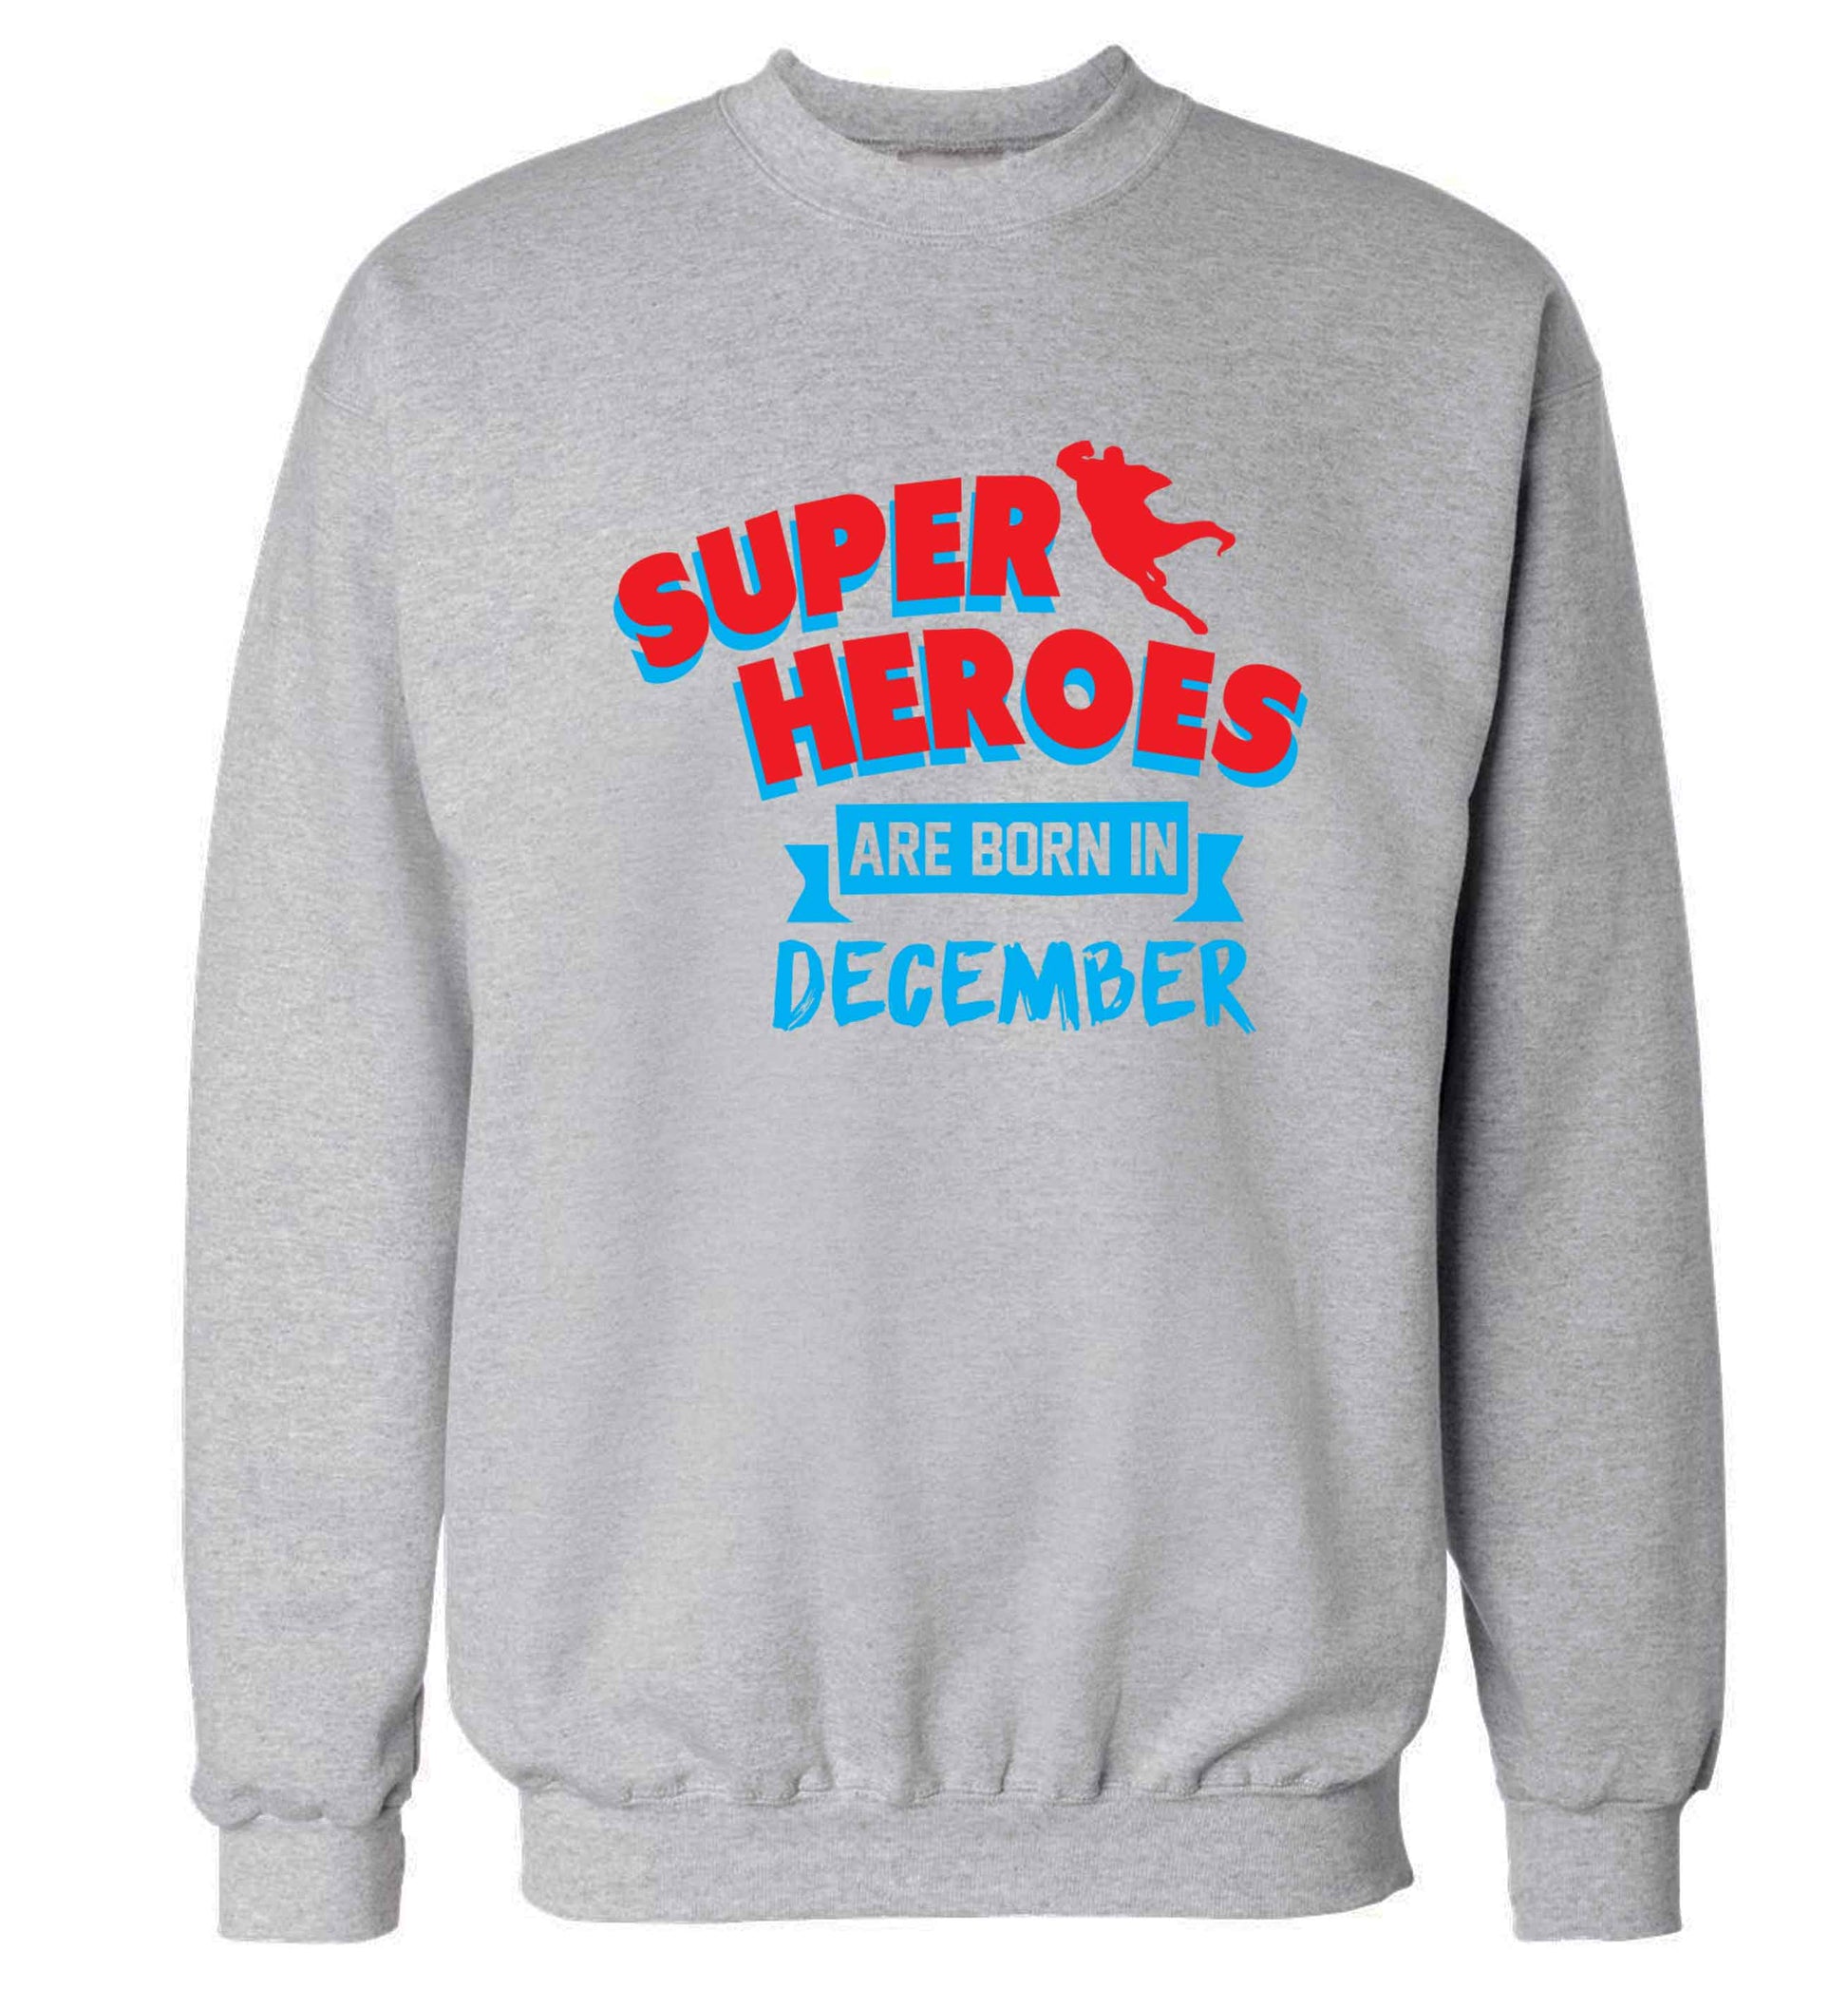 Superheroes are born in December Adult's unisex grey Sweater 2XL